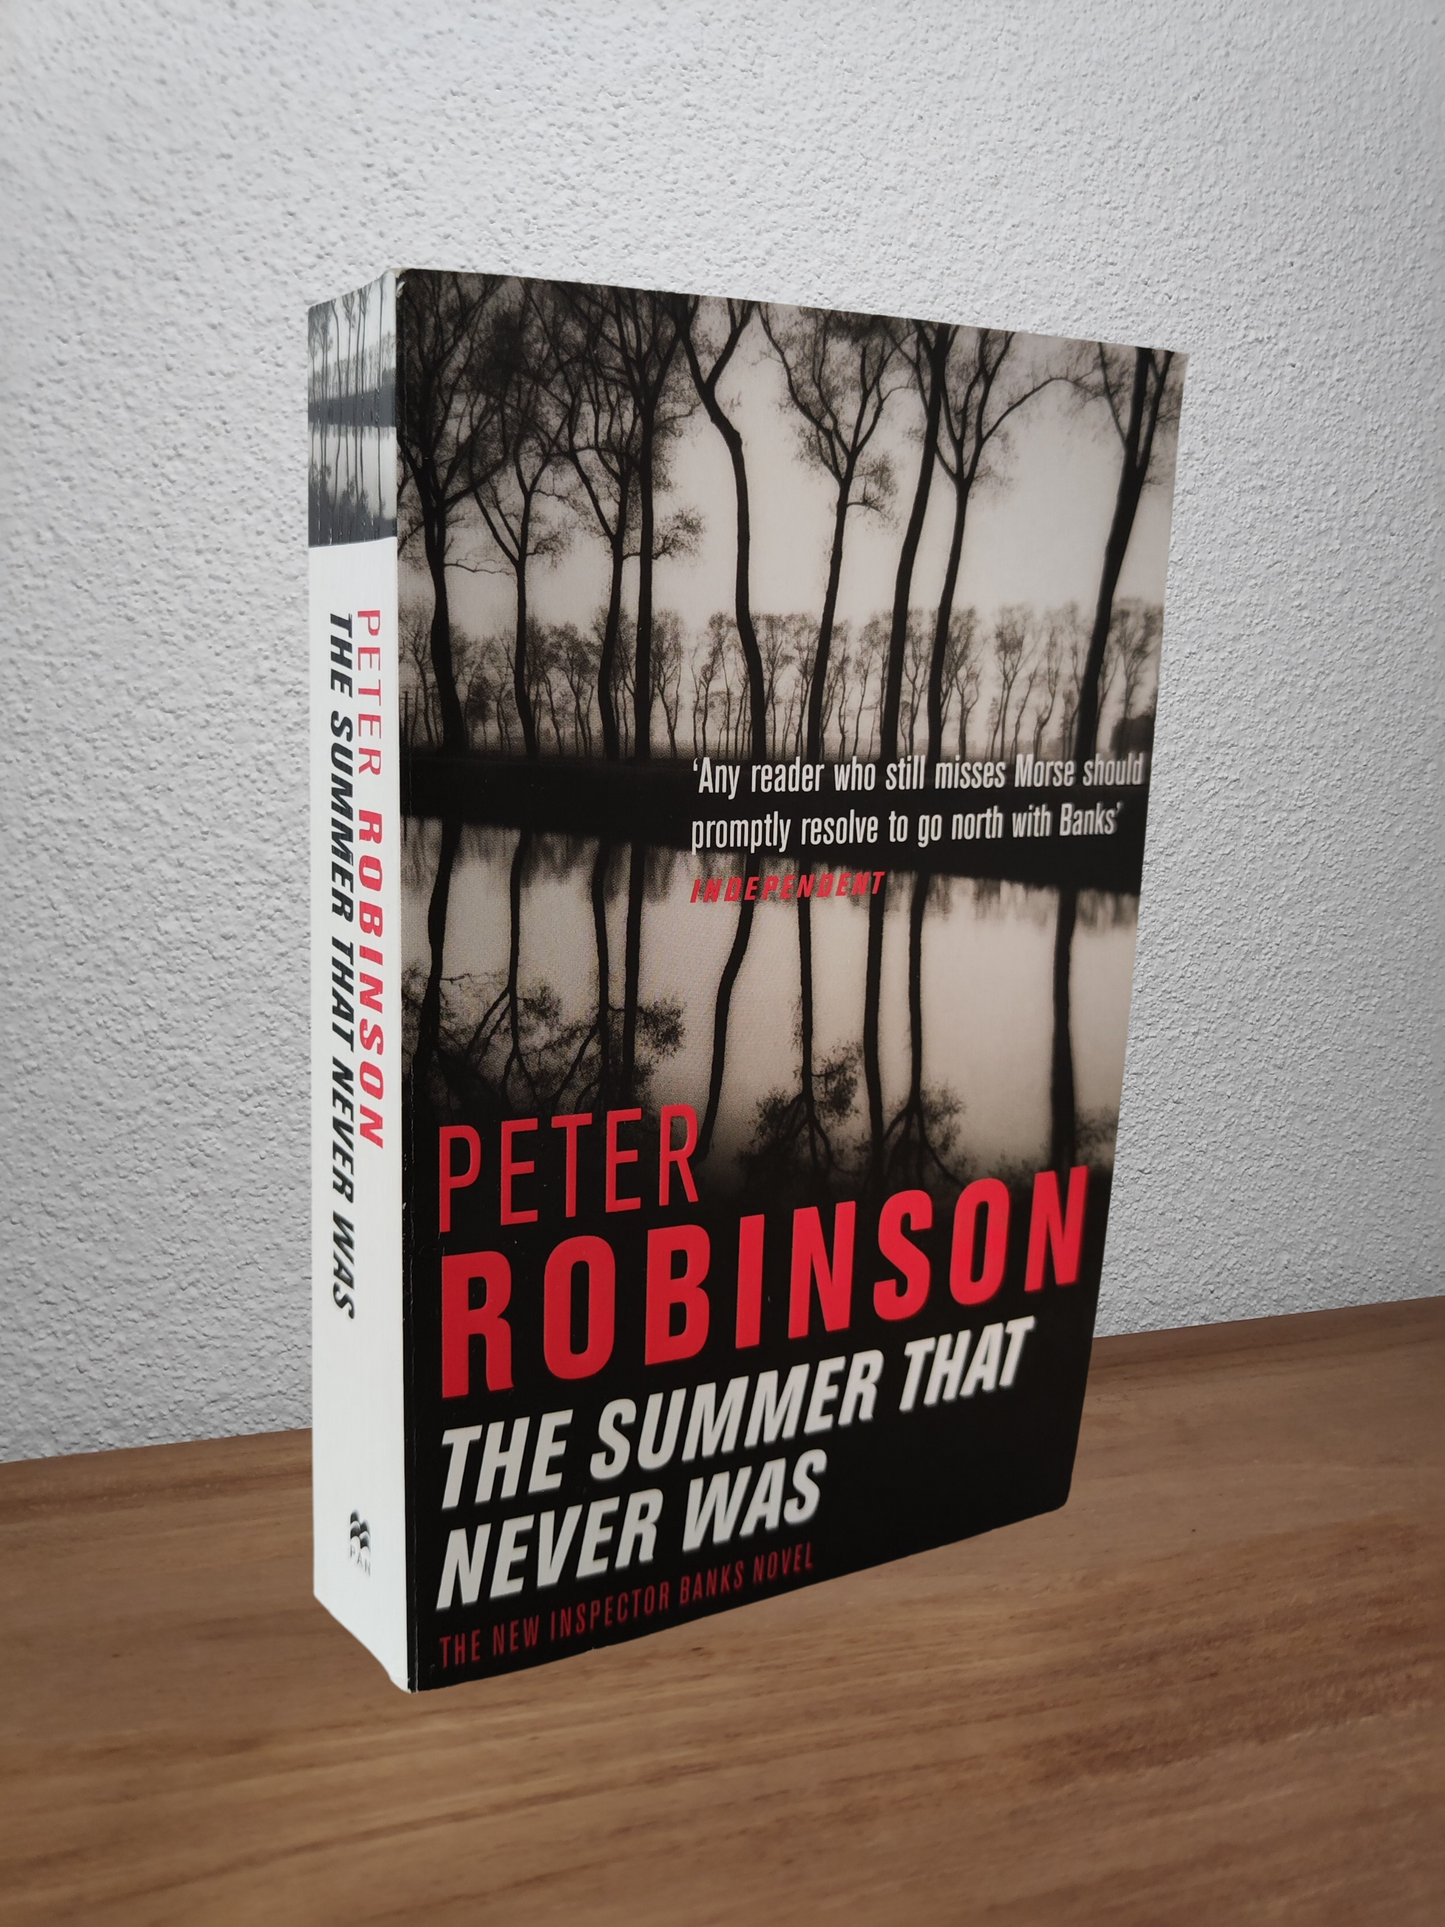 Peter Robinson - The Summer That Never Was (Inspector Banks #13)